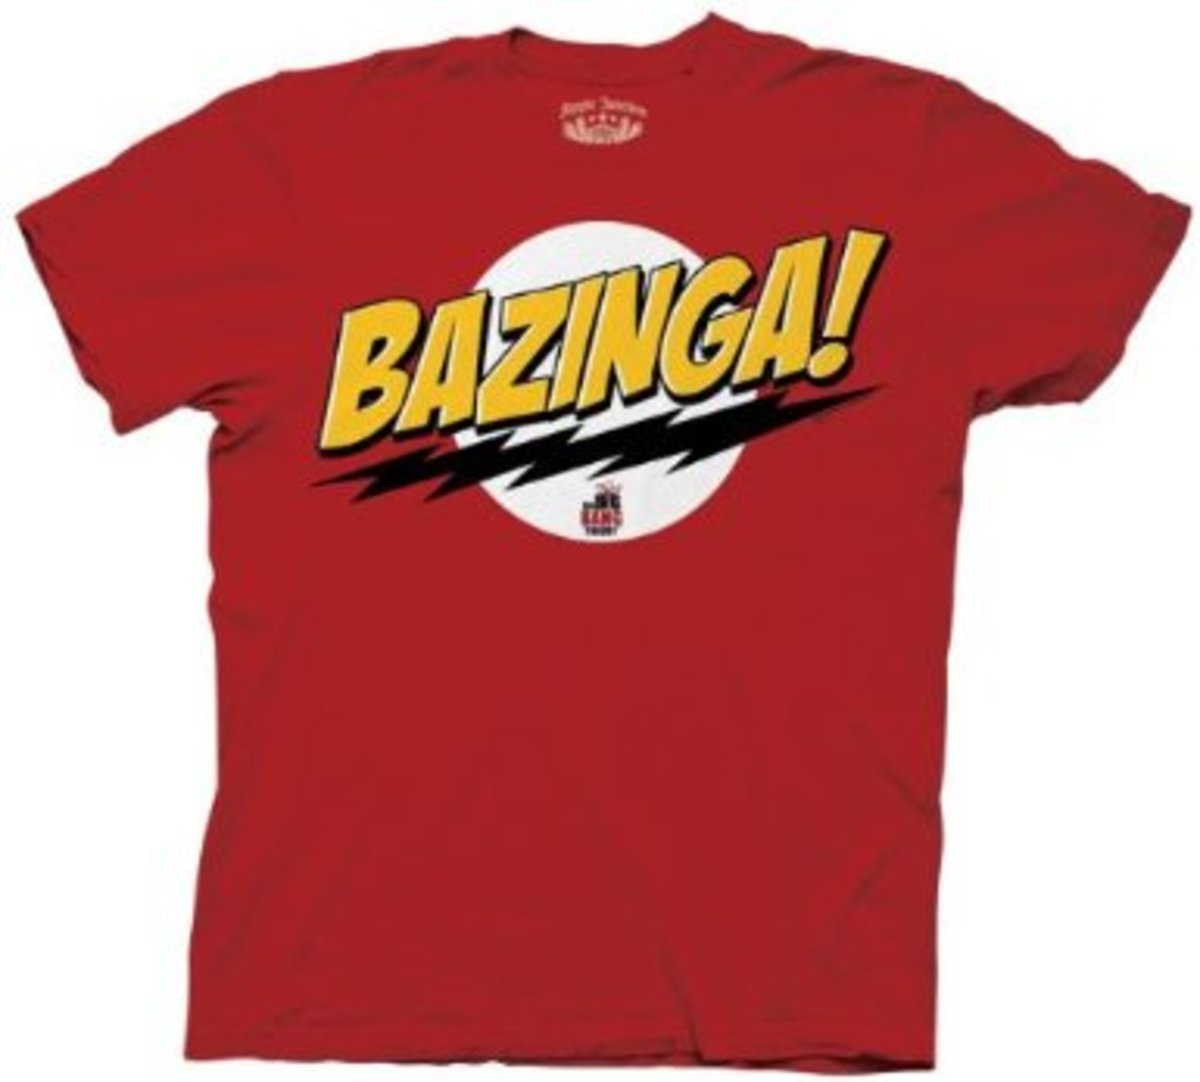 Sheldon Cooper T-Shirts: The Best from The Big Bang Theory | HubPages